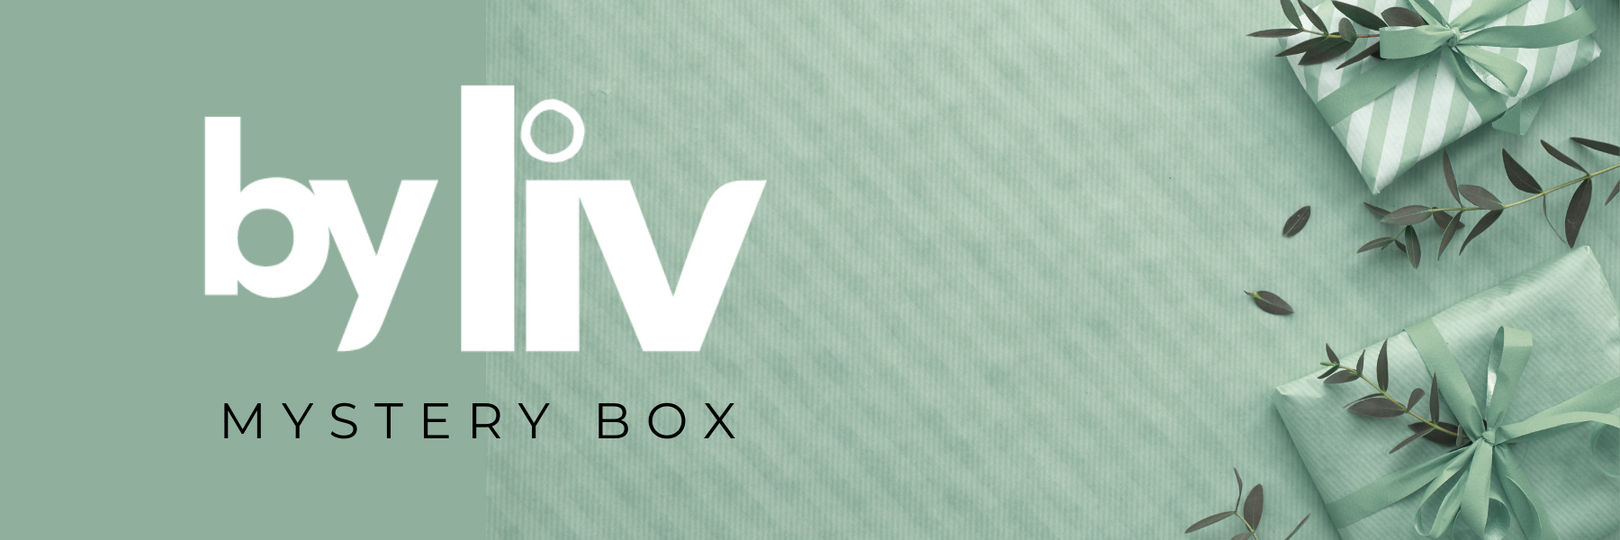 The By Liv Box - Monthly MYSTERY subscription box